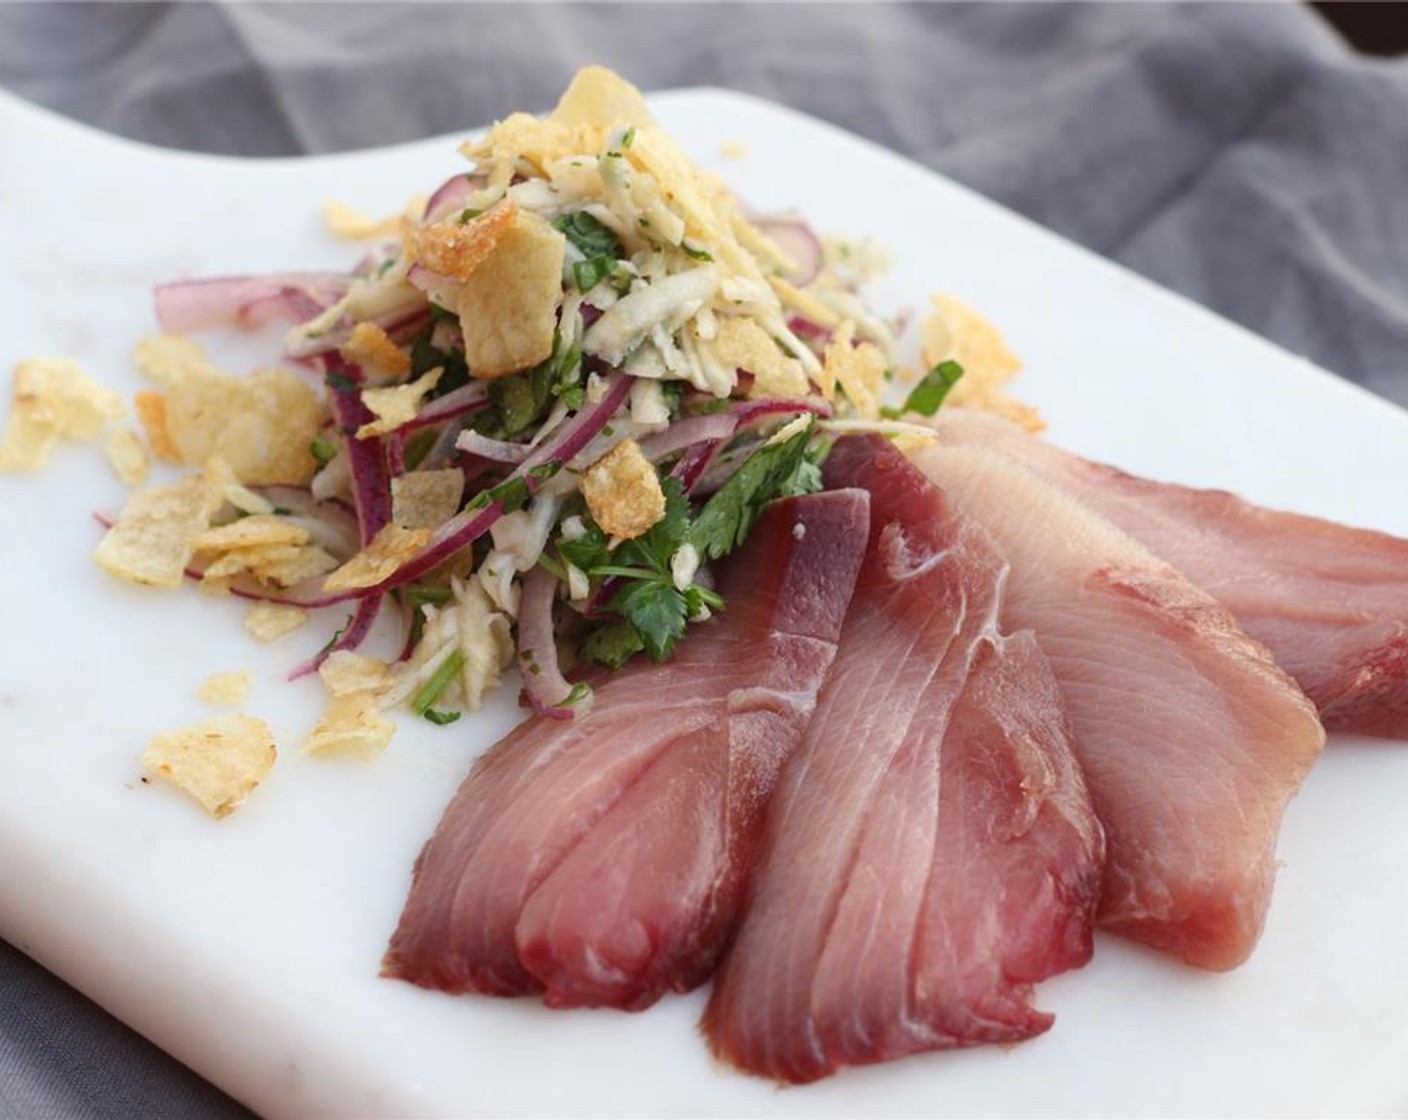 step 13 Thinly slice each Hamachi fillet on a bias cut into half-inch slices. Serve cold on plates with kohlrabi slaw topped with potato chips on the side. Enjoy!